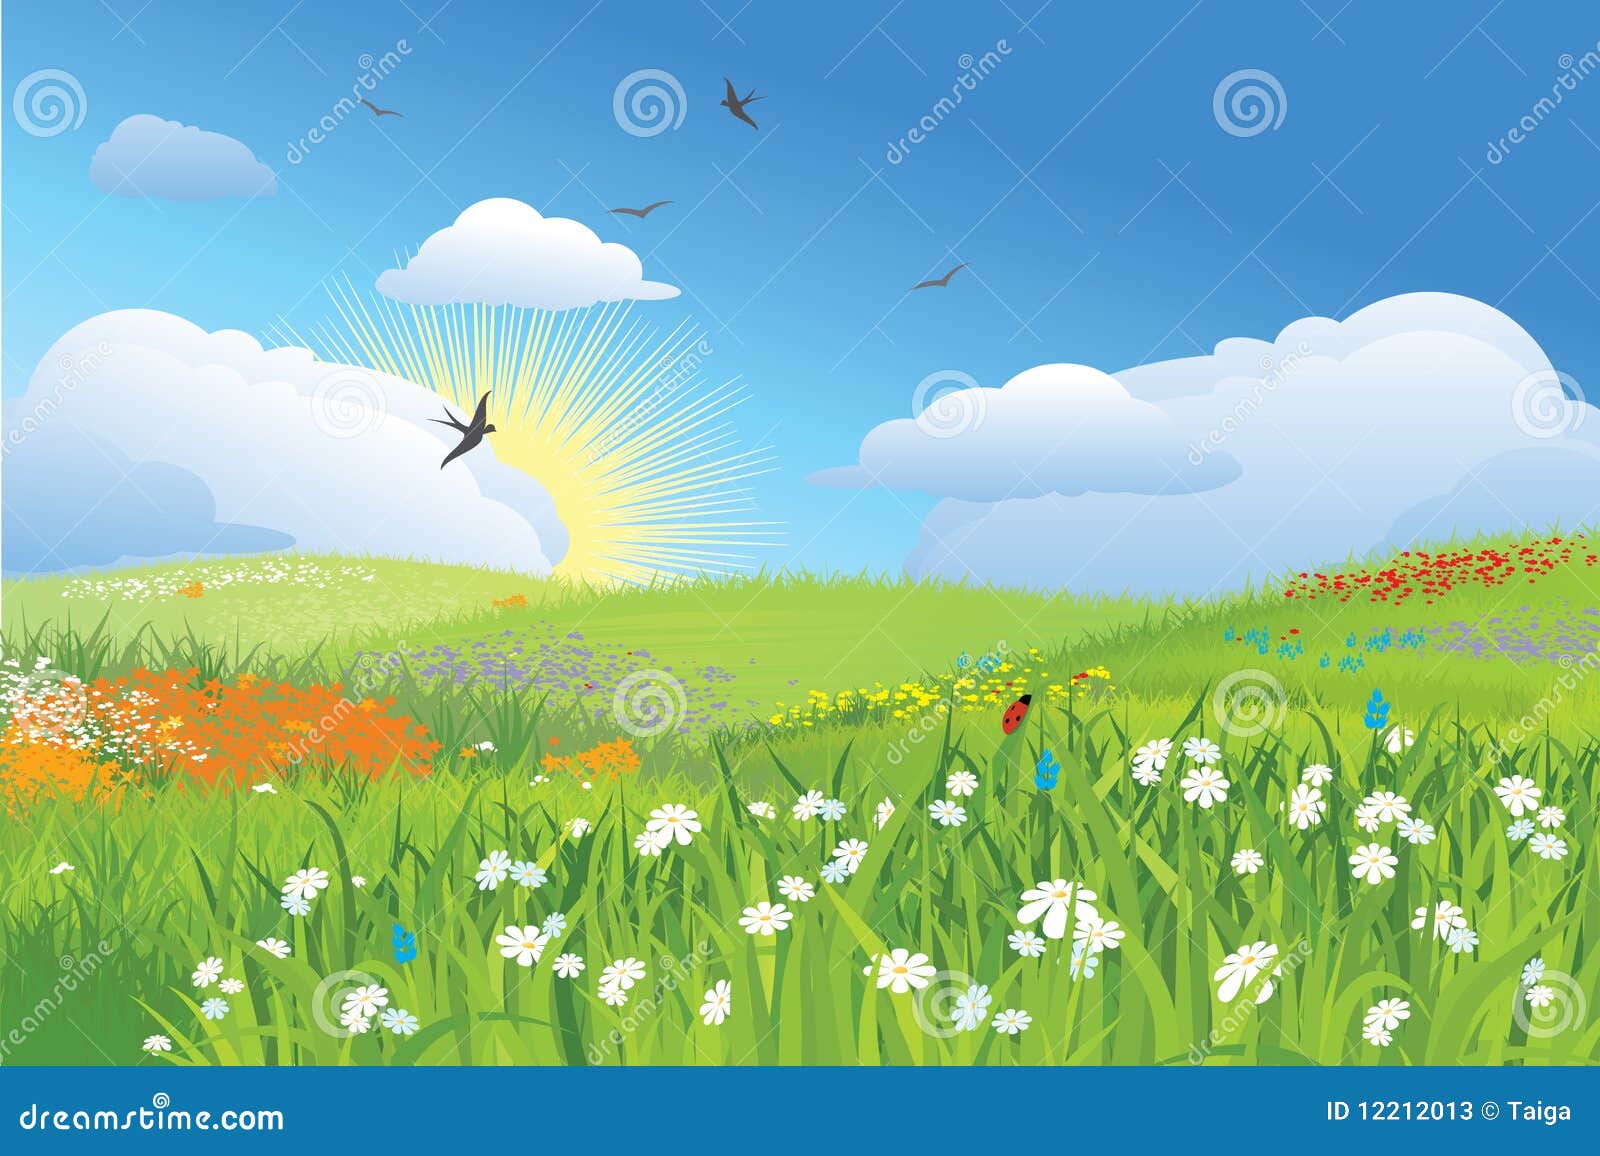 flower meadow clipart - photo #40